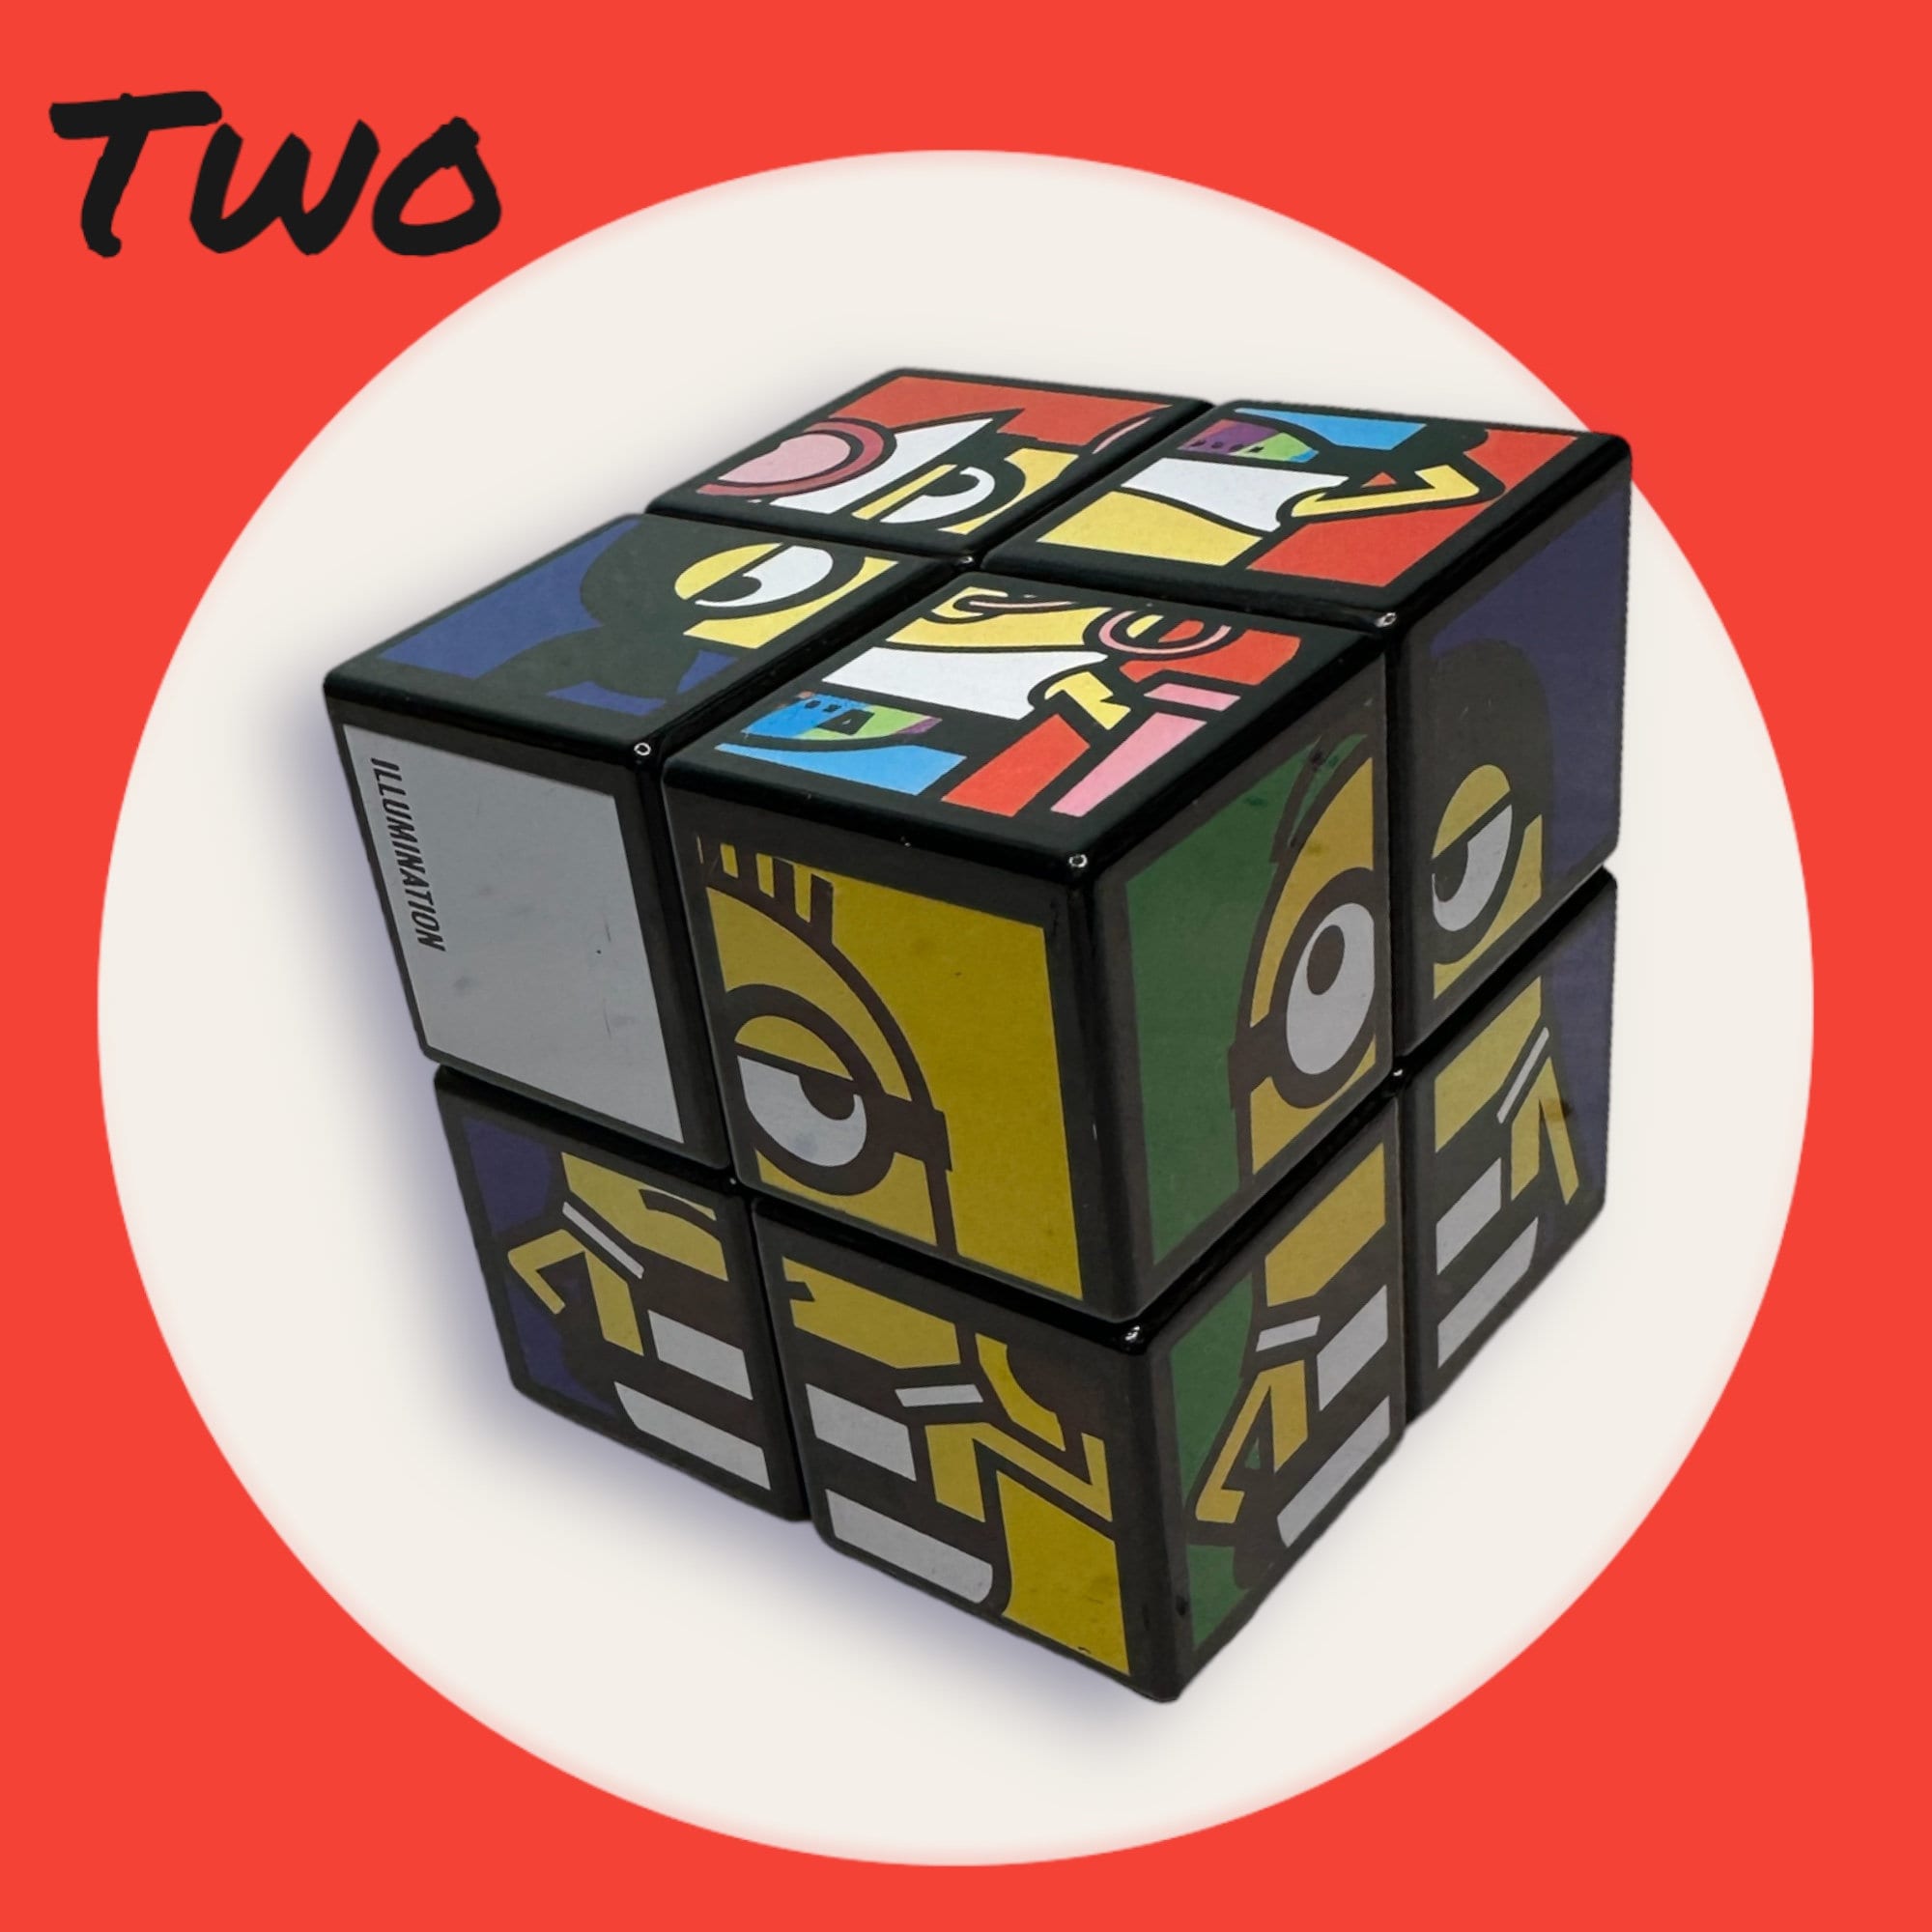 Official Rubik's Mini Cube 2x2 Speed Mechanical Puzzle Rare Item from  McDonalds Happy meal